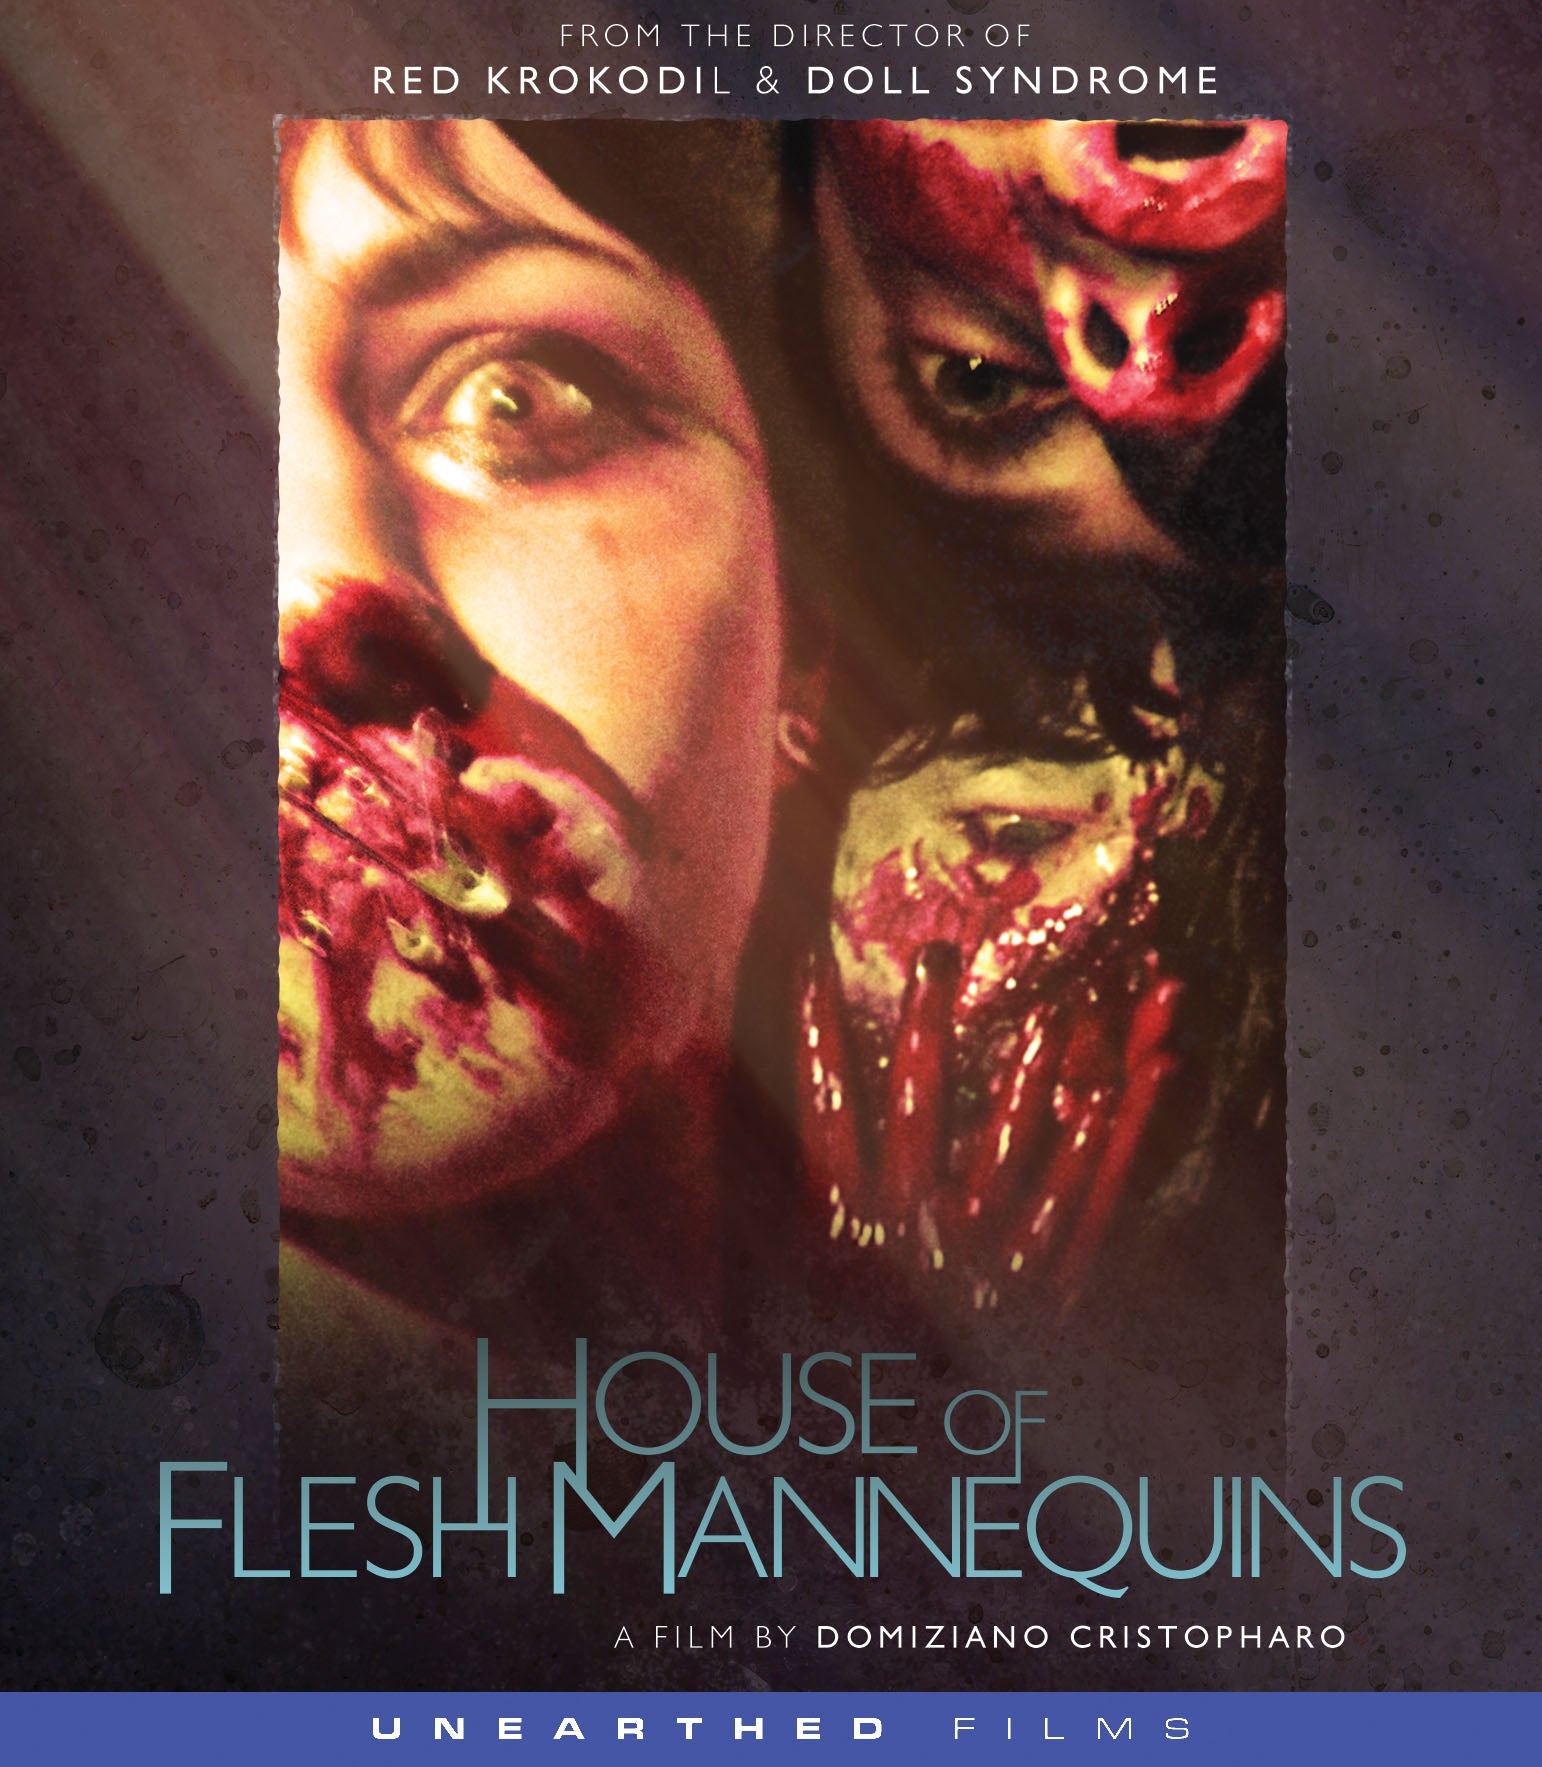 House Of Flesh Mannequins (Limited Edition) Blu-Ray Blu-Ray